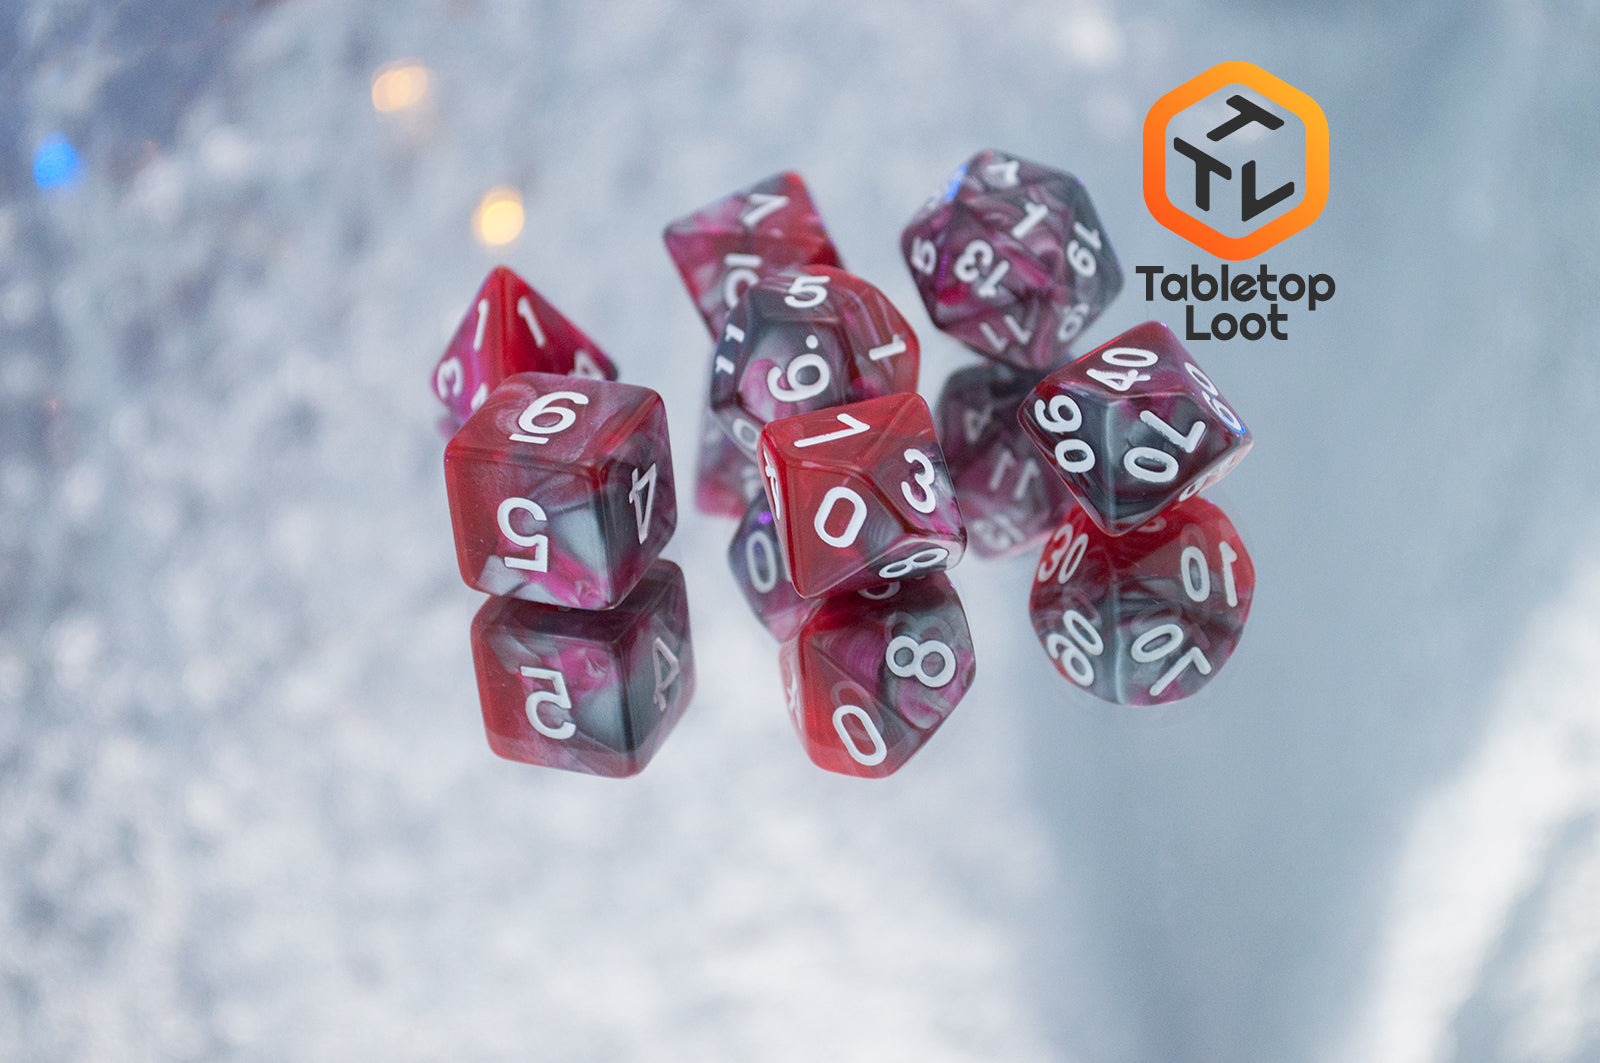 The Dragon's Blood 7 piece dice set from Tabletop Loot with swirled red and grey resin and white numbering.